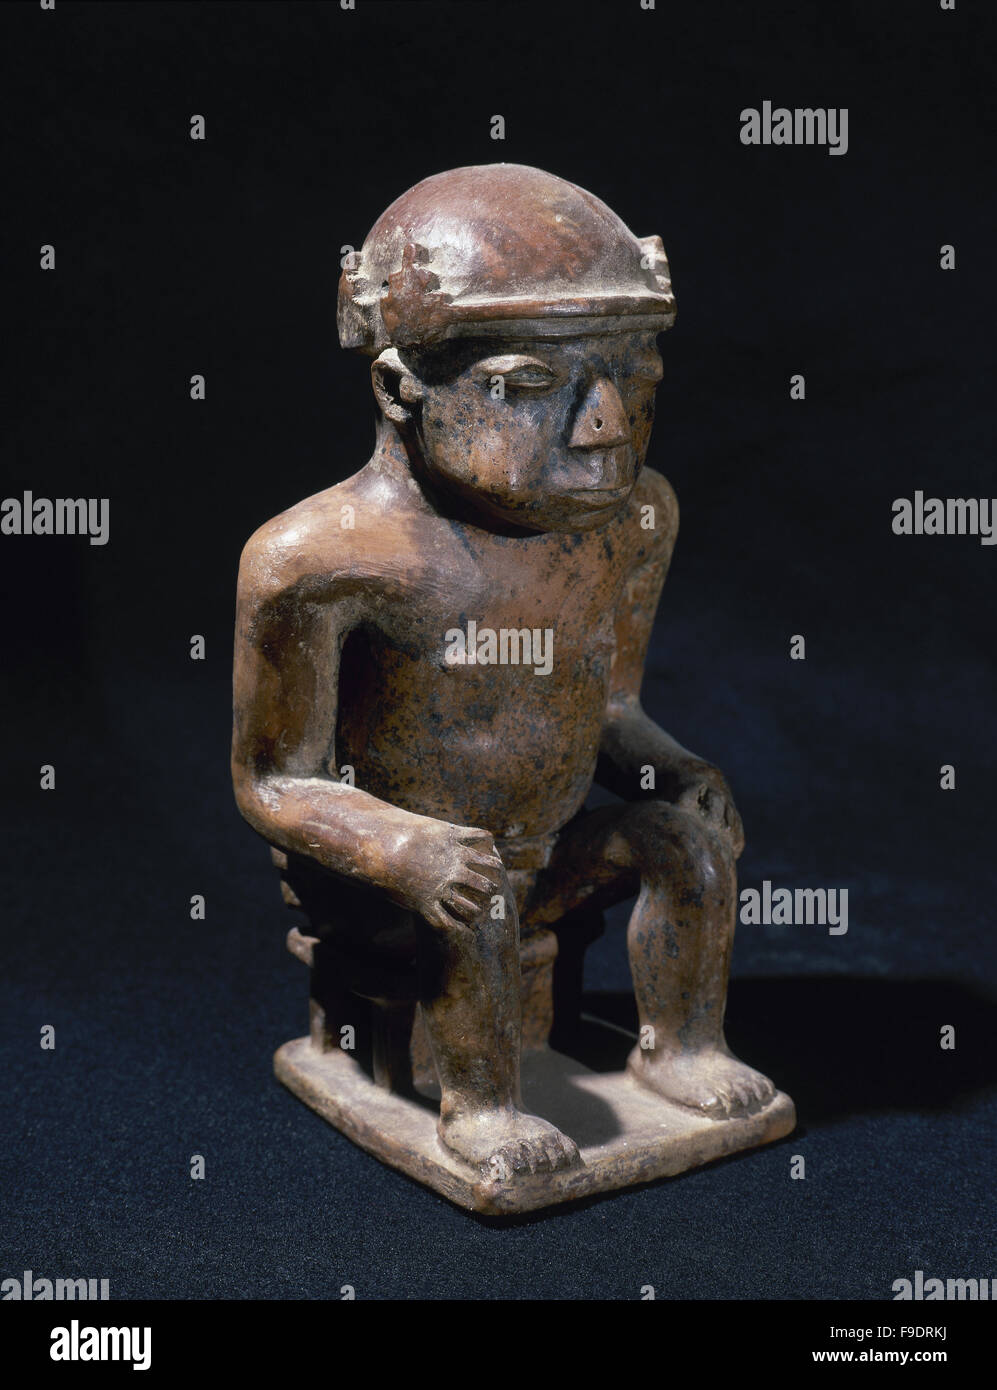 Pre-Columbian art. Pre-Incan. Negative Carchi culture. 850-1500 AD. 'Coquero'. Man sitting with hands on knees and chewing coca leaves.20 x 10,5 x 8 cm. From Ecuador. Private collection. Stock Photo